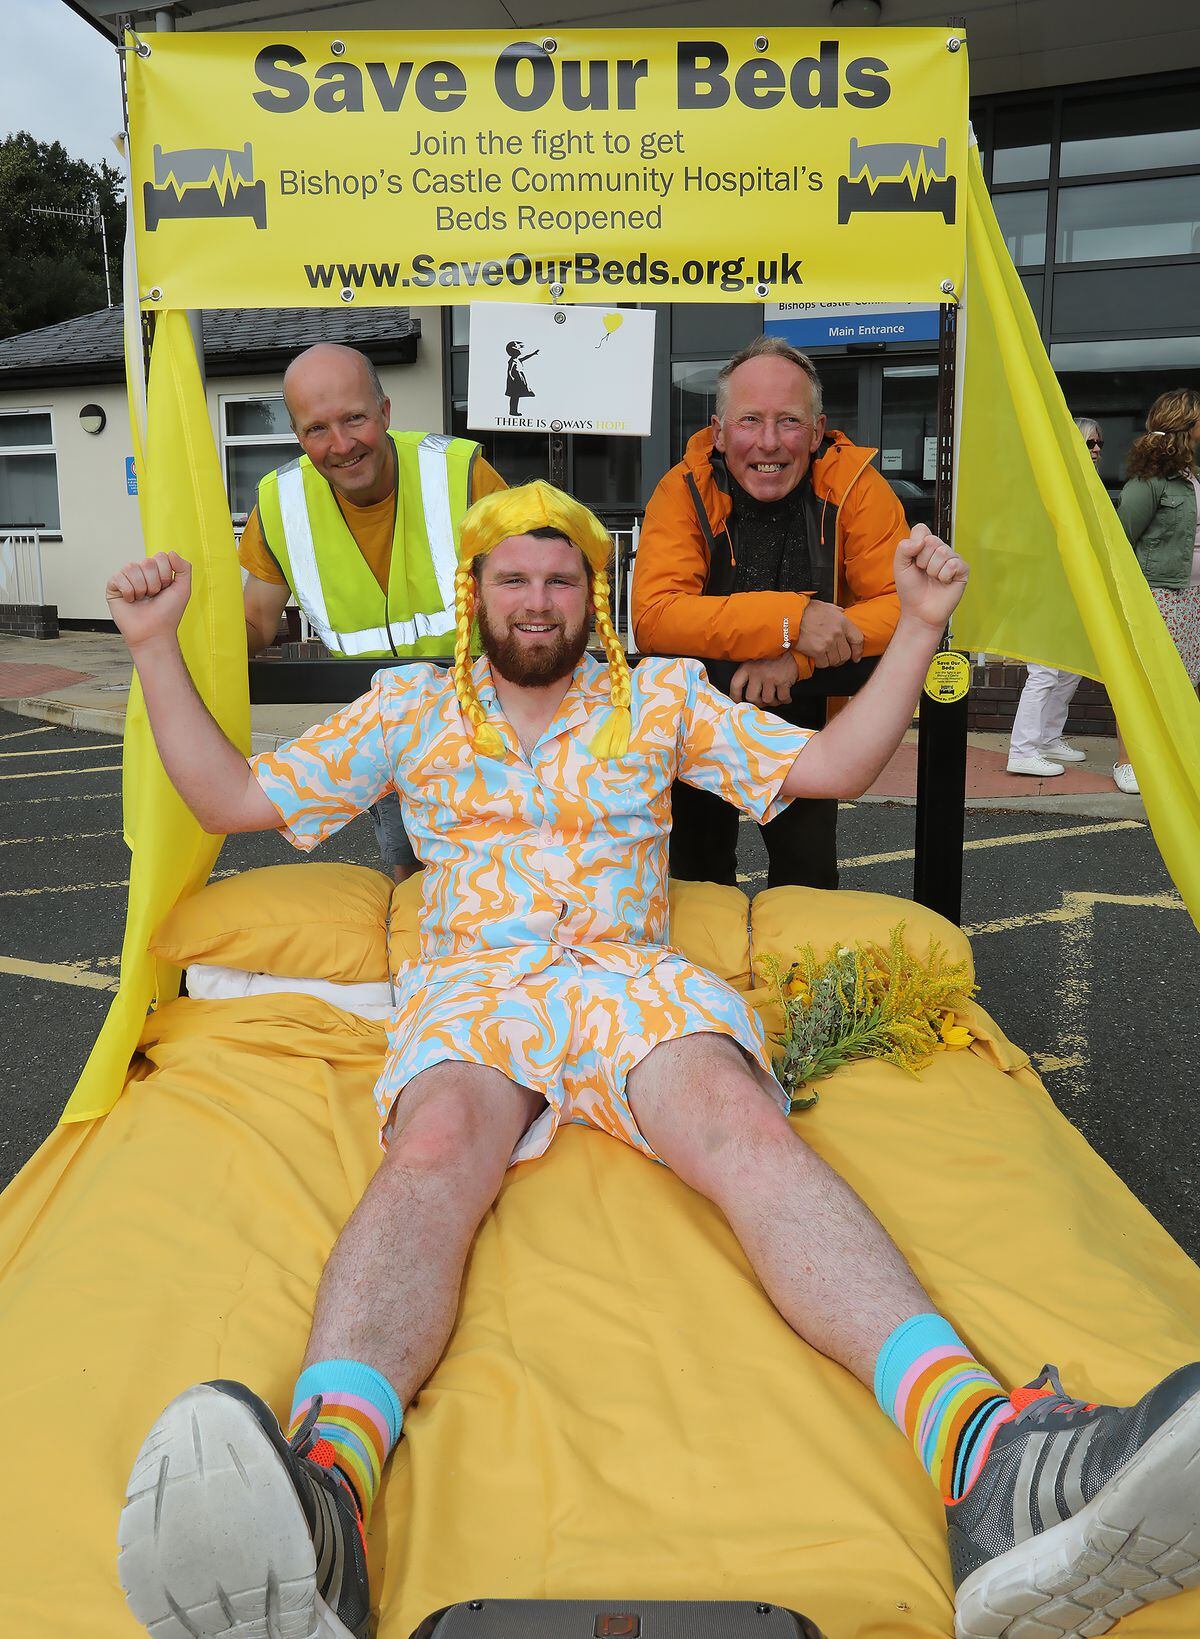 The bed push is part of a campaign to keep beds at Bishop's Castle Community Hospital